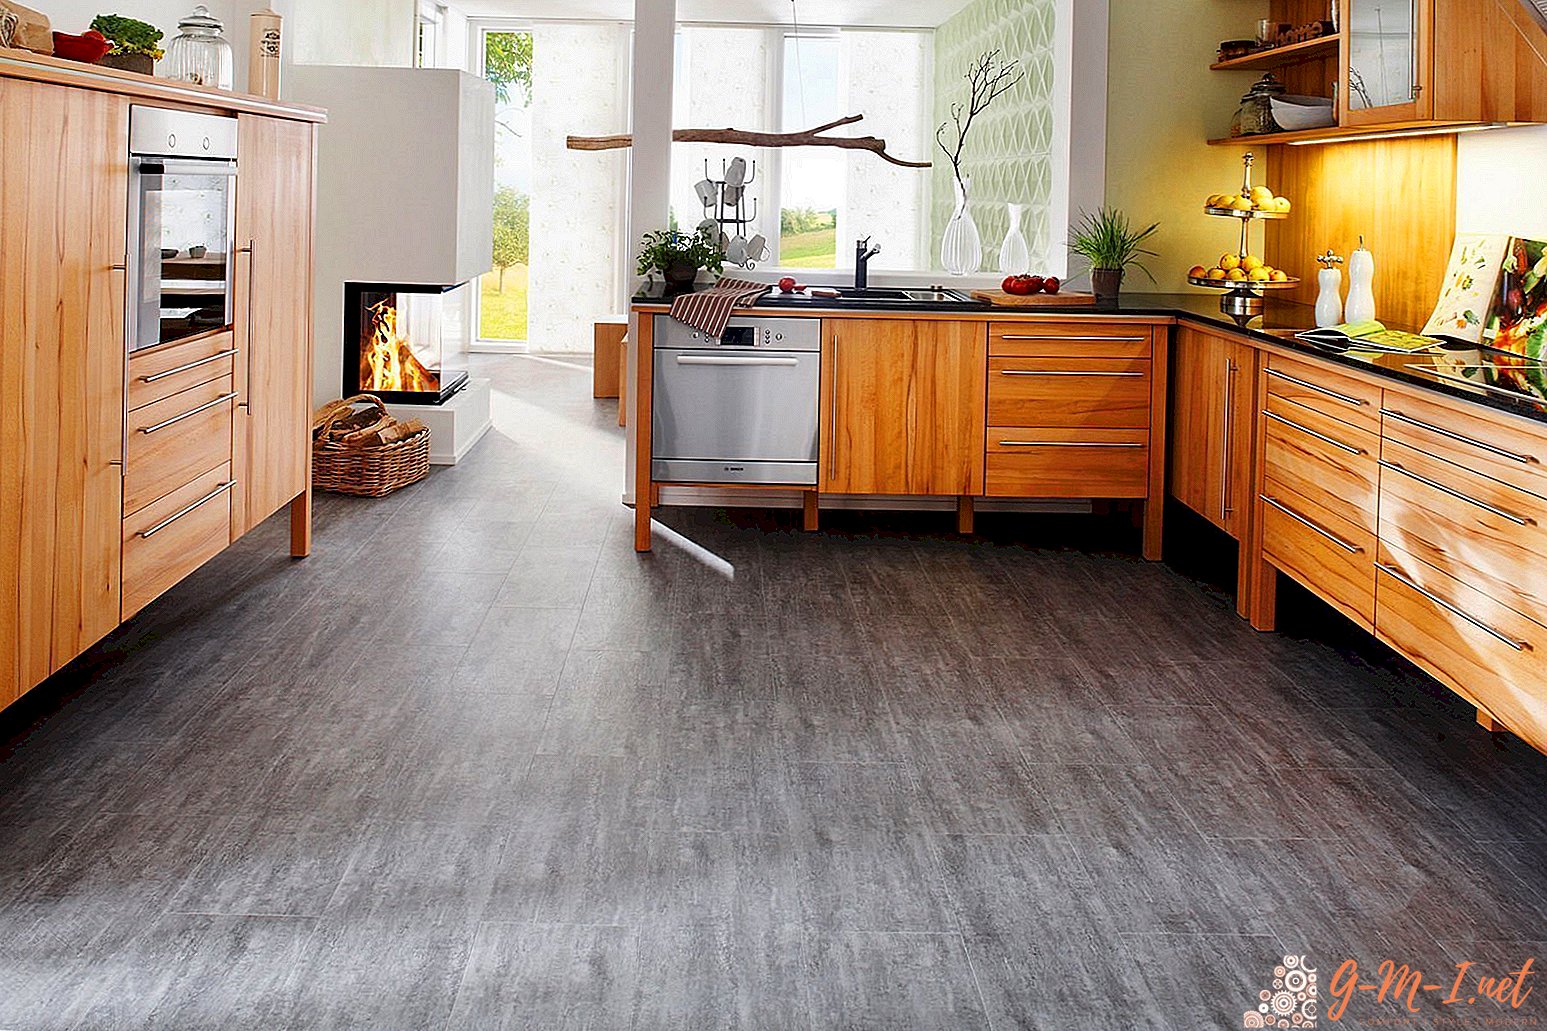 What linoleum to choose for the kitchen